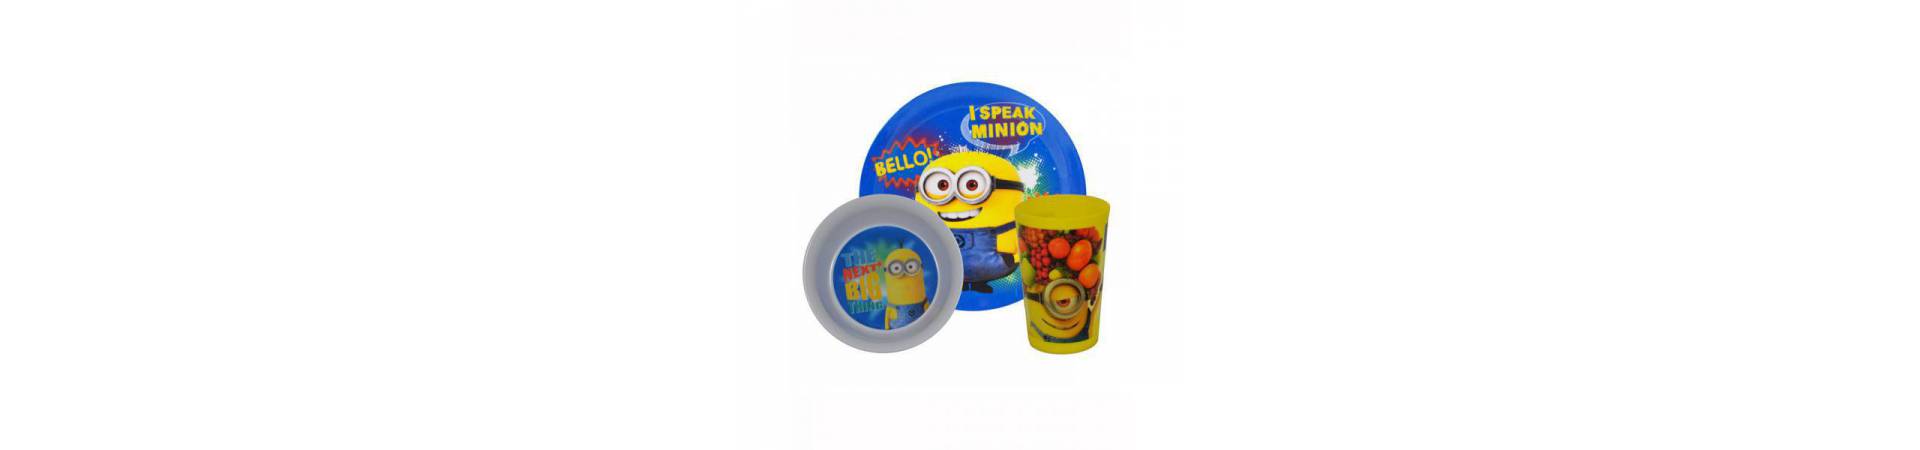 Minions - Household Goods